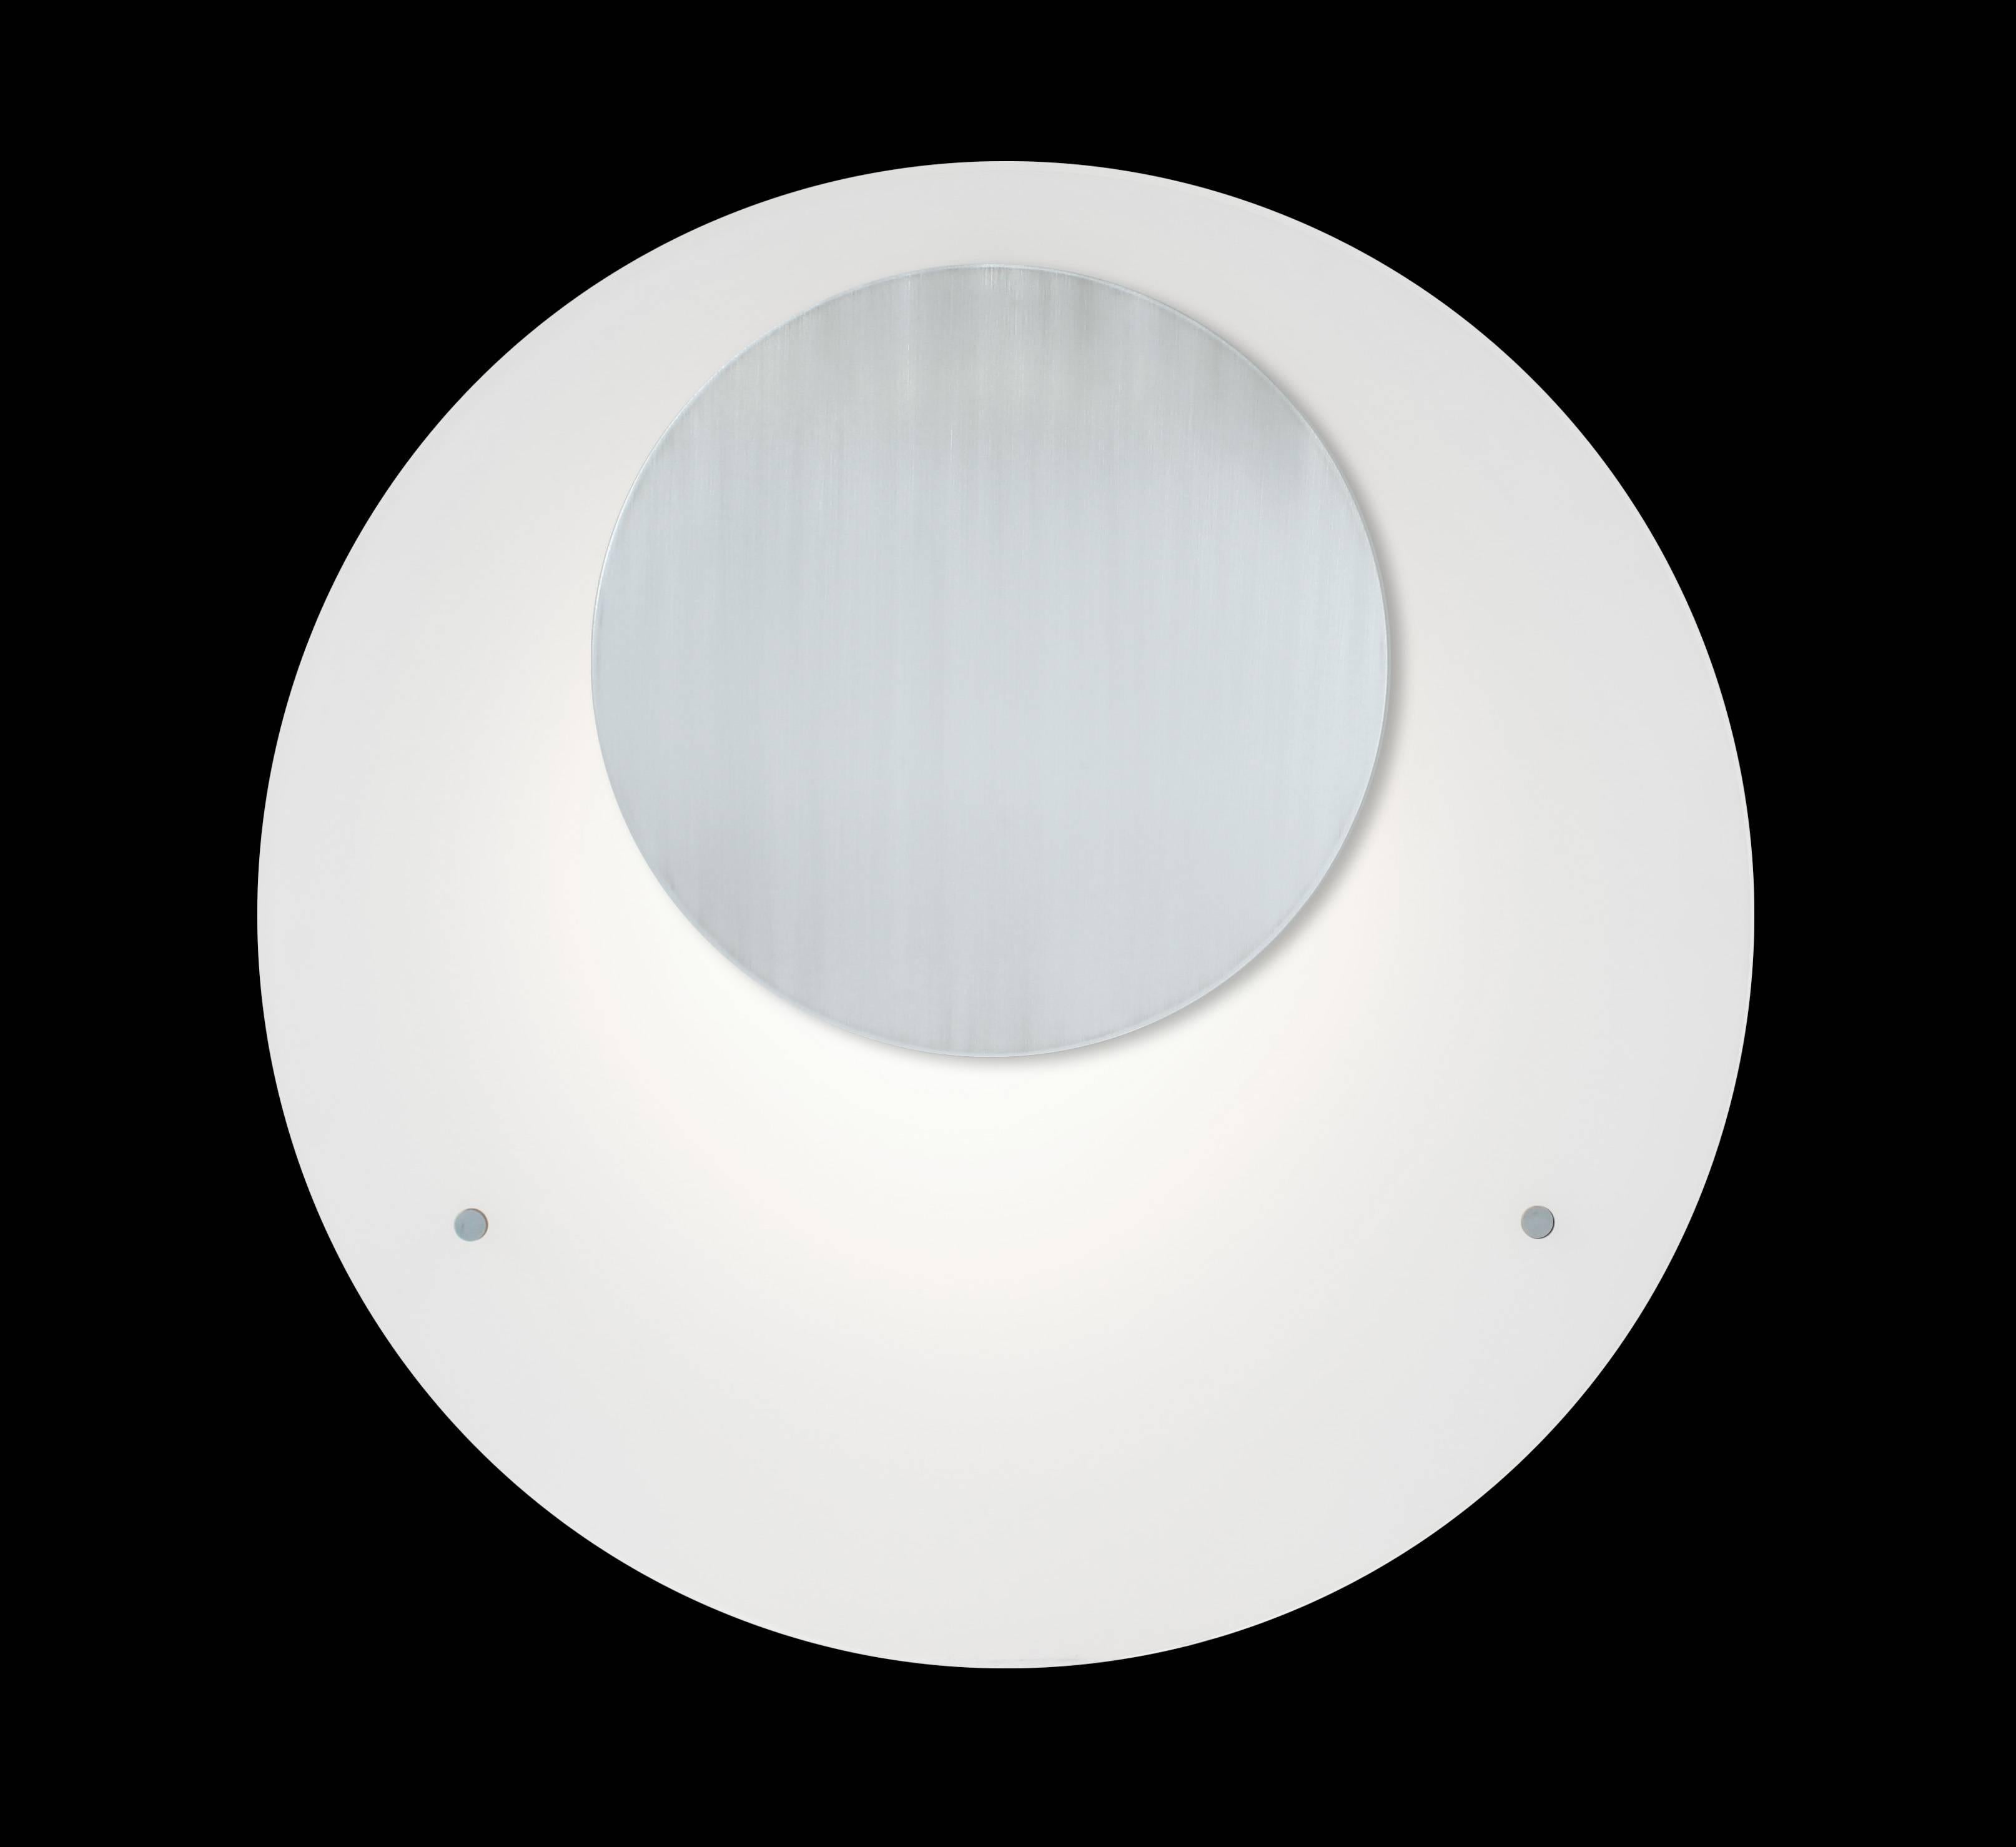 Round aluminium plate over flat white glass panel. Can be used in place of wall art as a decorative feature or large-scale sconce. Interesting when used in pairs. In the manner of Mid-Century Modern design style. LED illuminated 3000K standard color